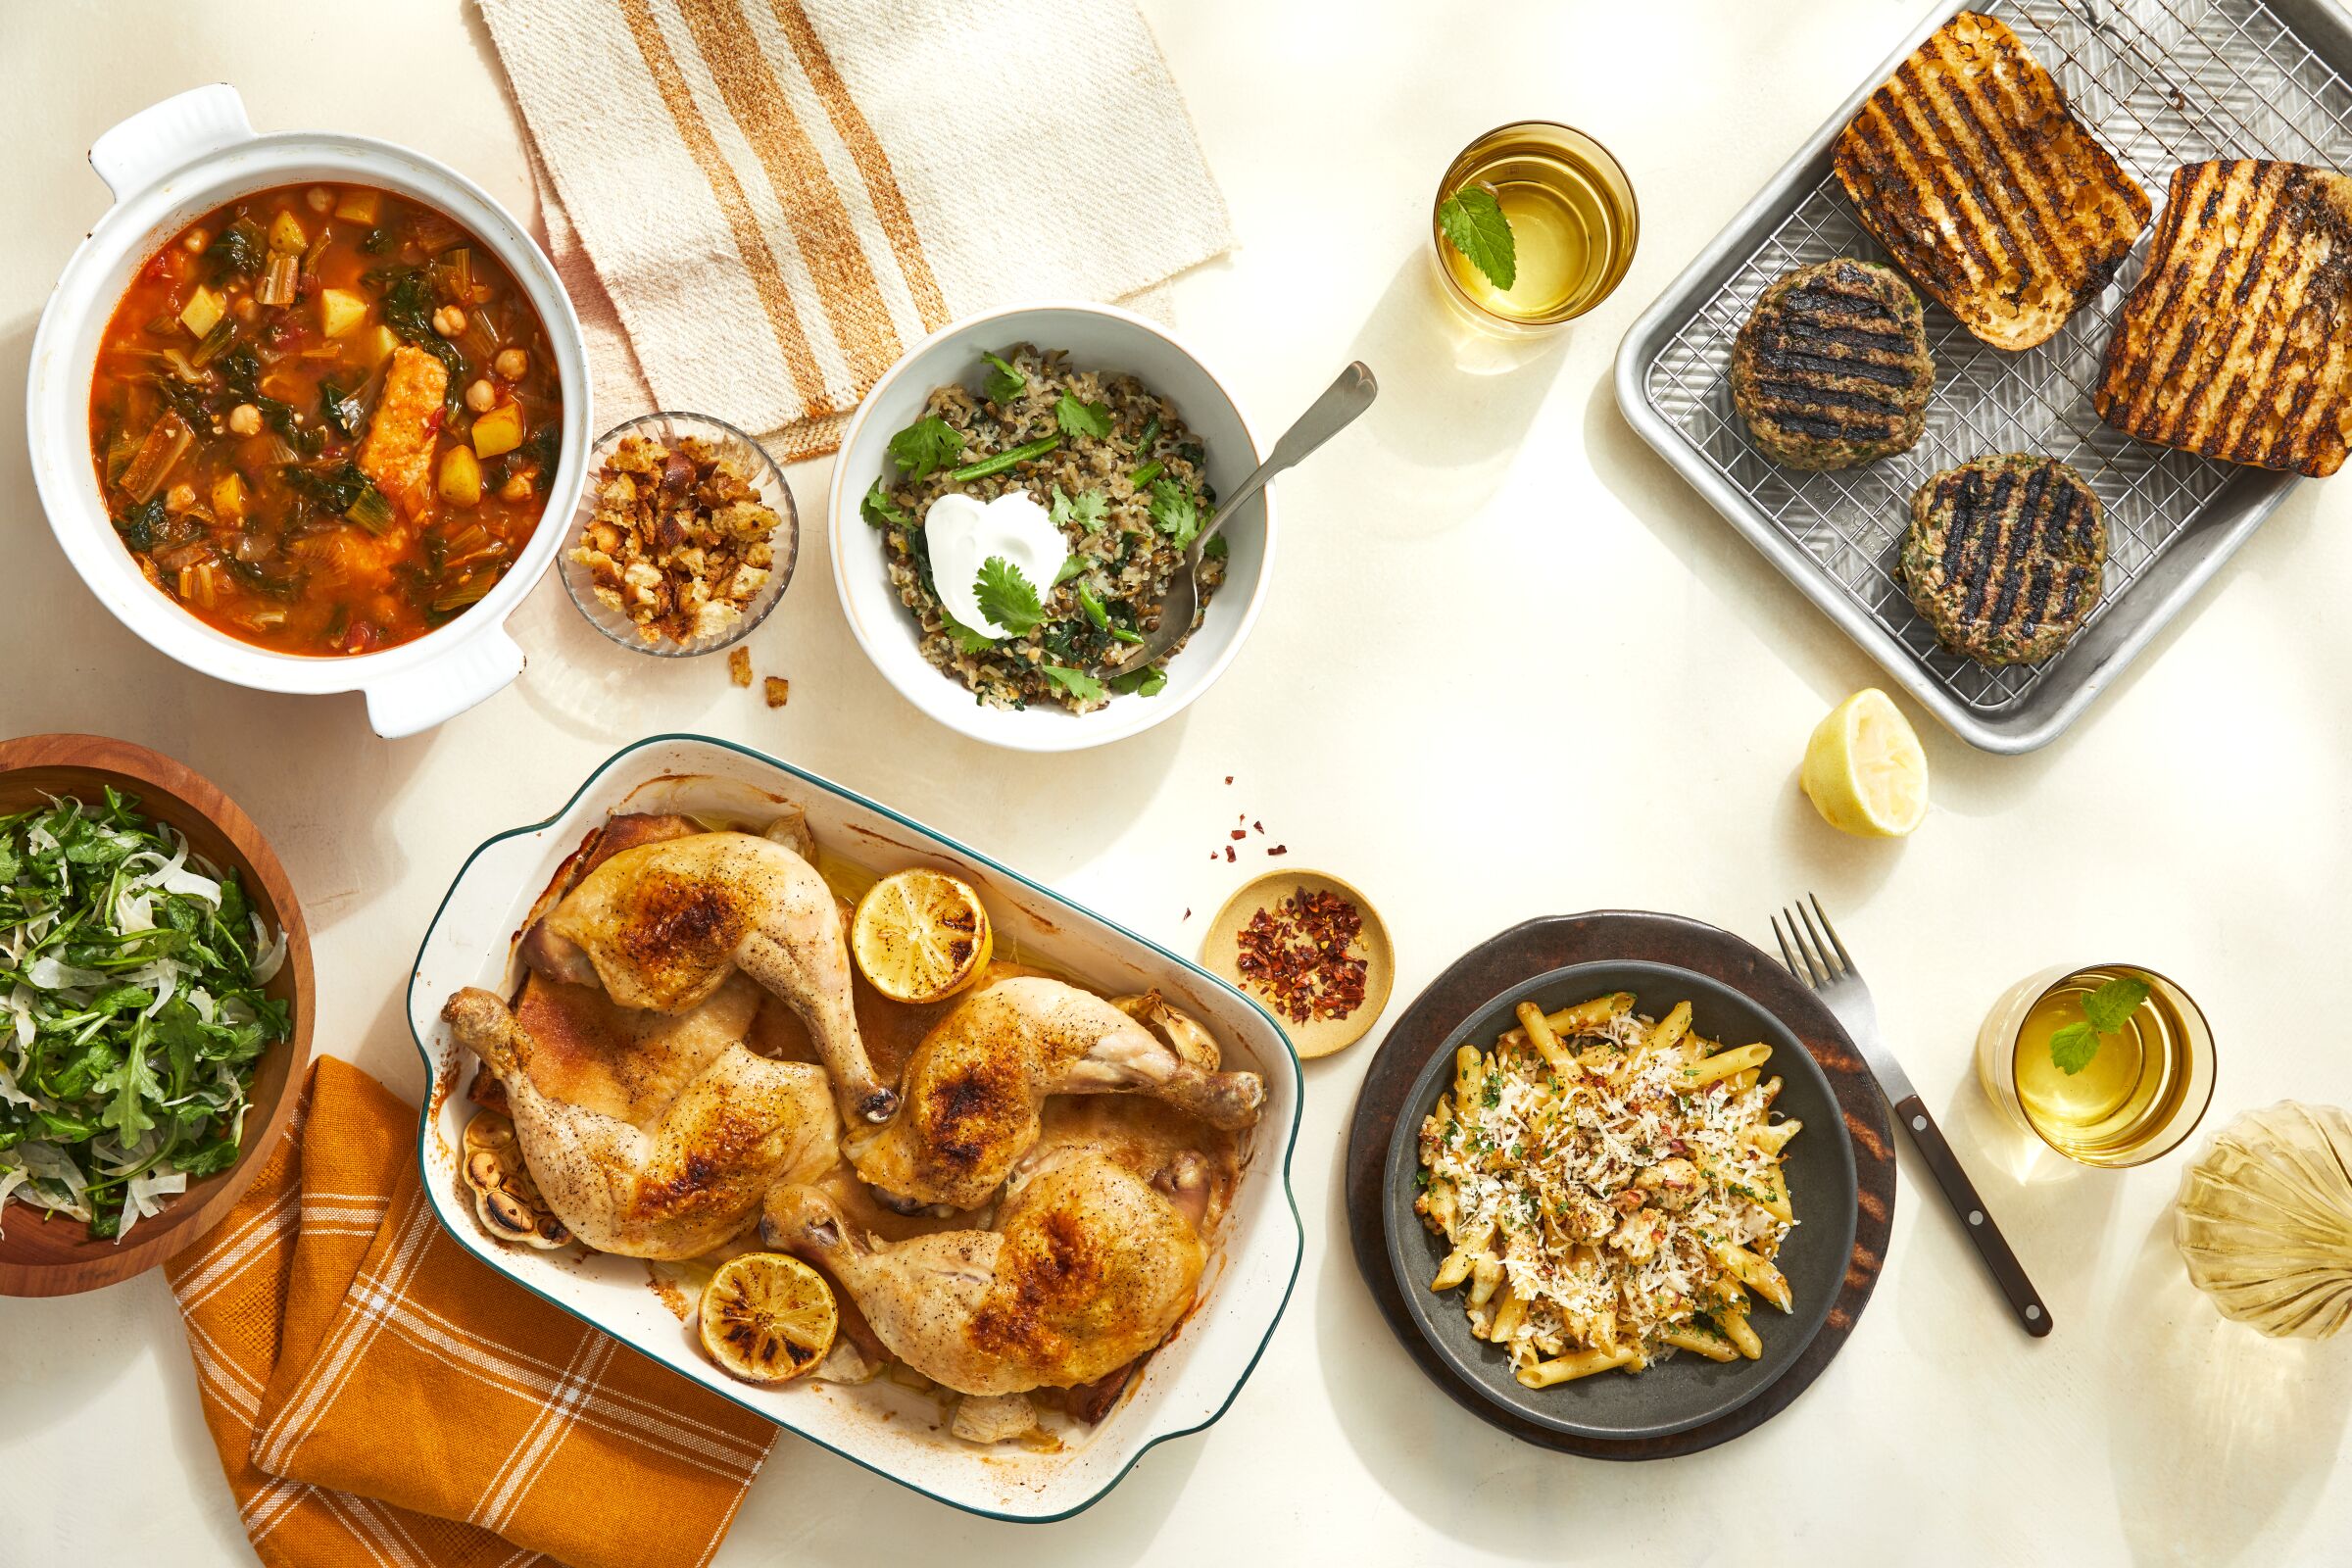 Chicken legs, penne with cauliflower and other dishes on a table